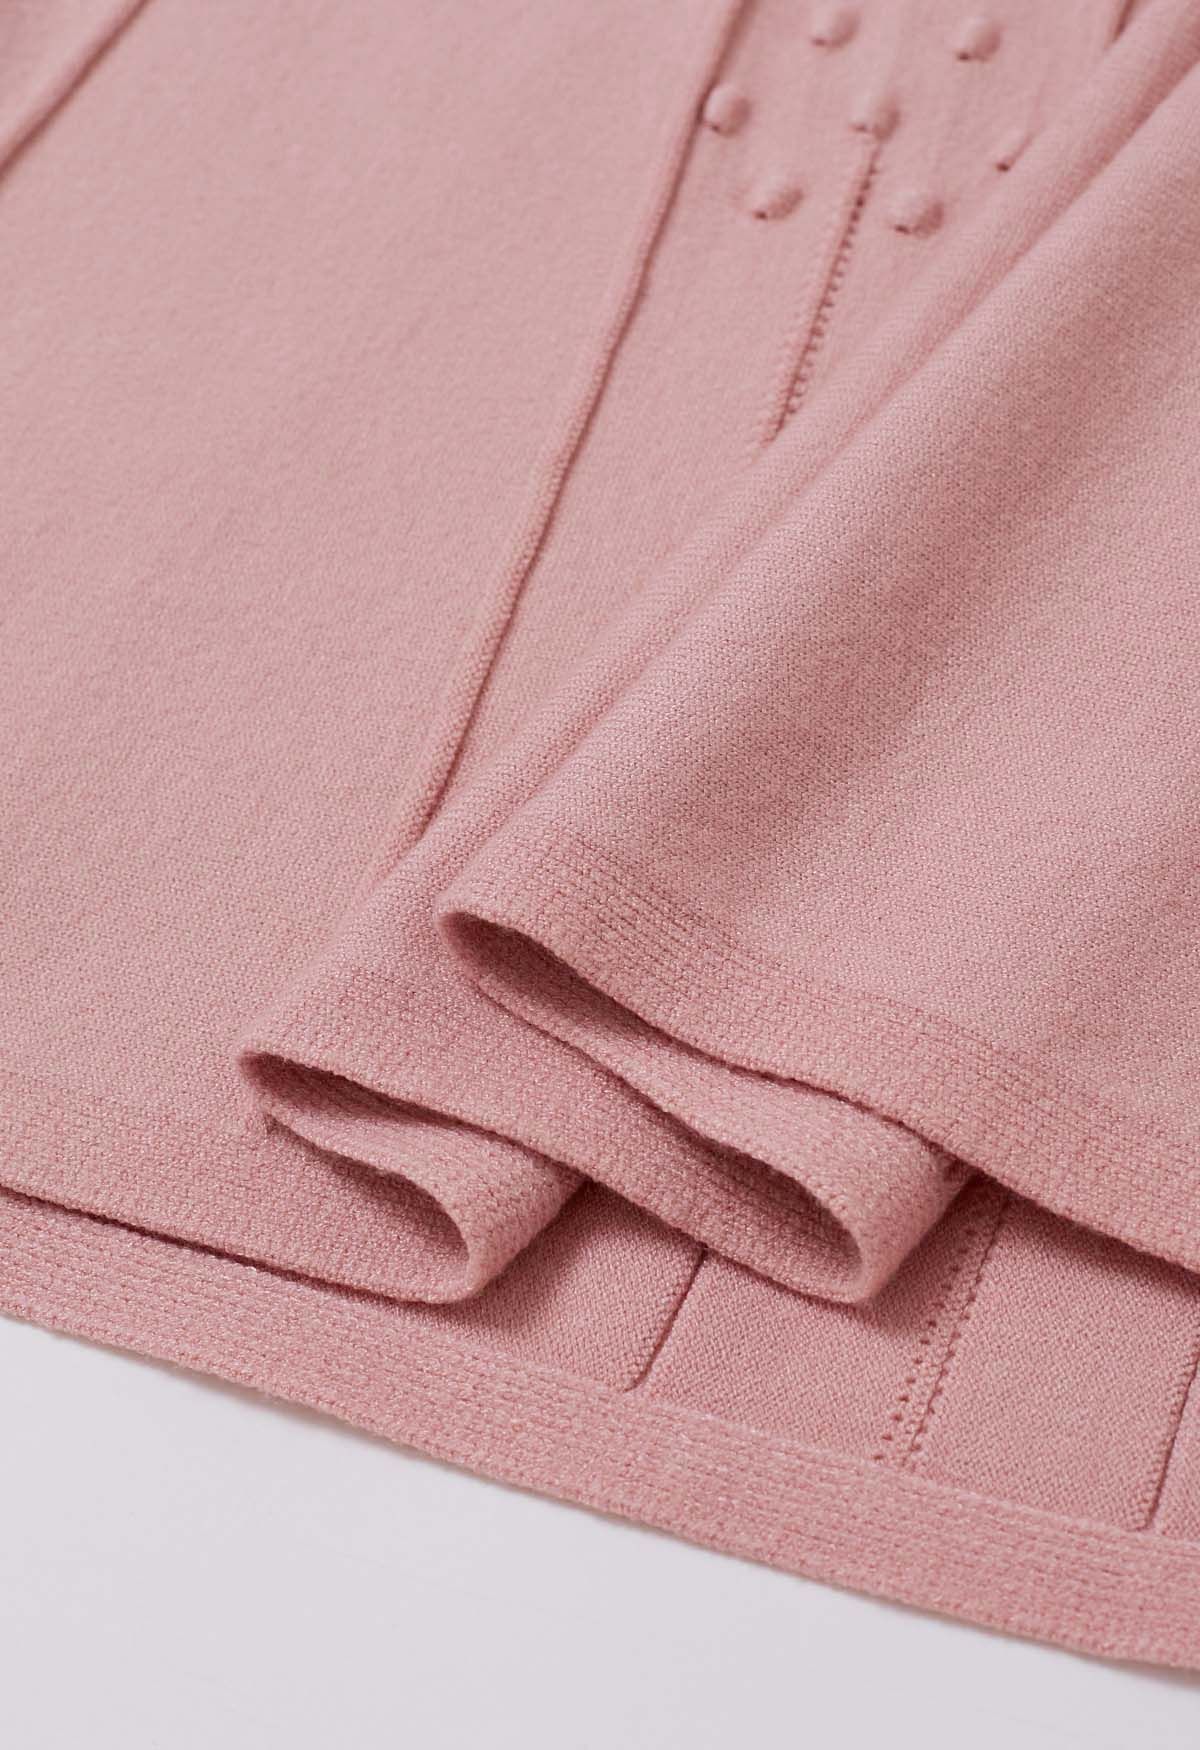 Embossed Dots Seam Knit Midi Skirt in Pink